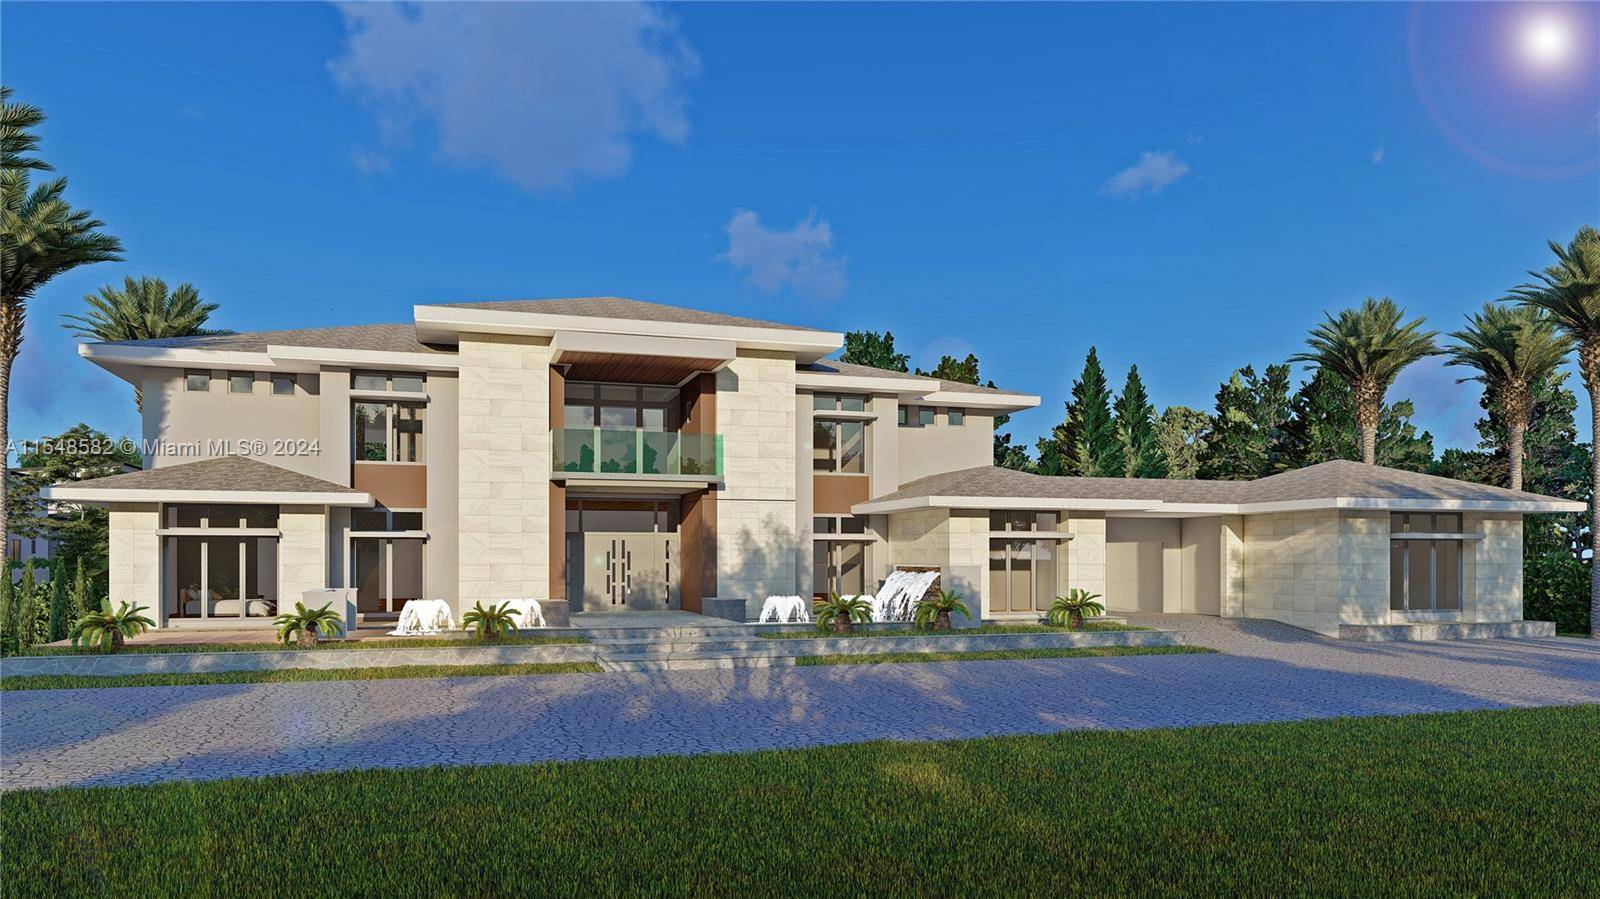 The spectacular Delano Contemporary estate is nestled within the exclusive gated enclave of LANDMARK RANCH ESTATES.